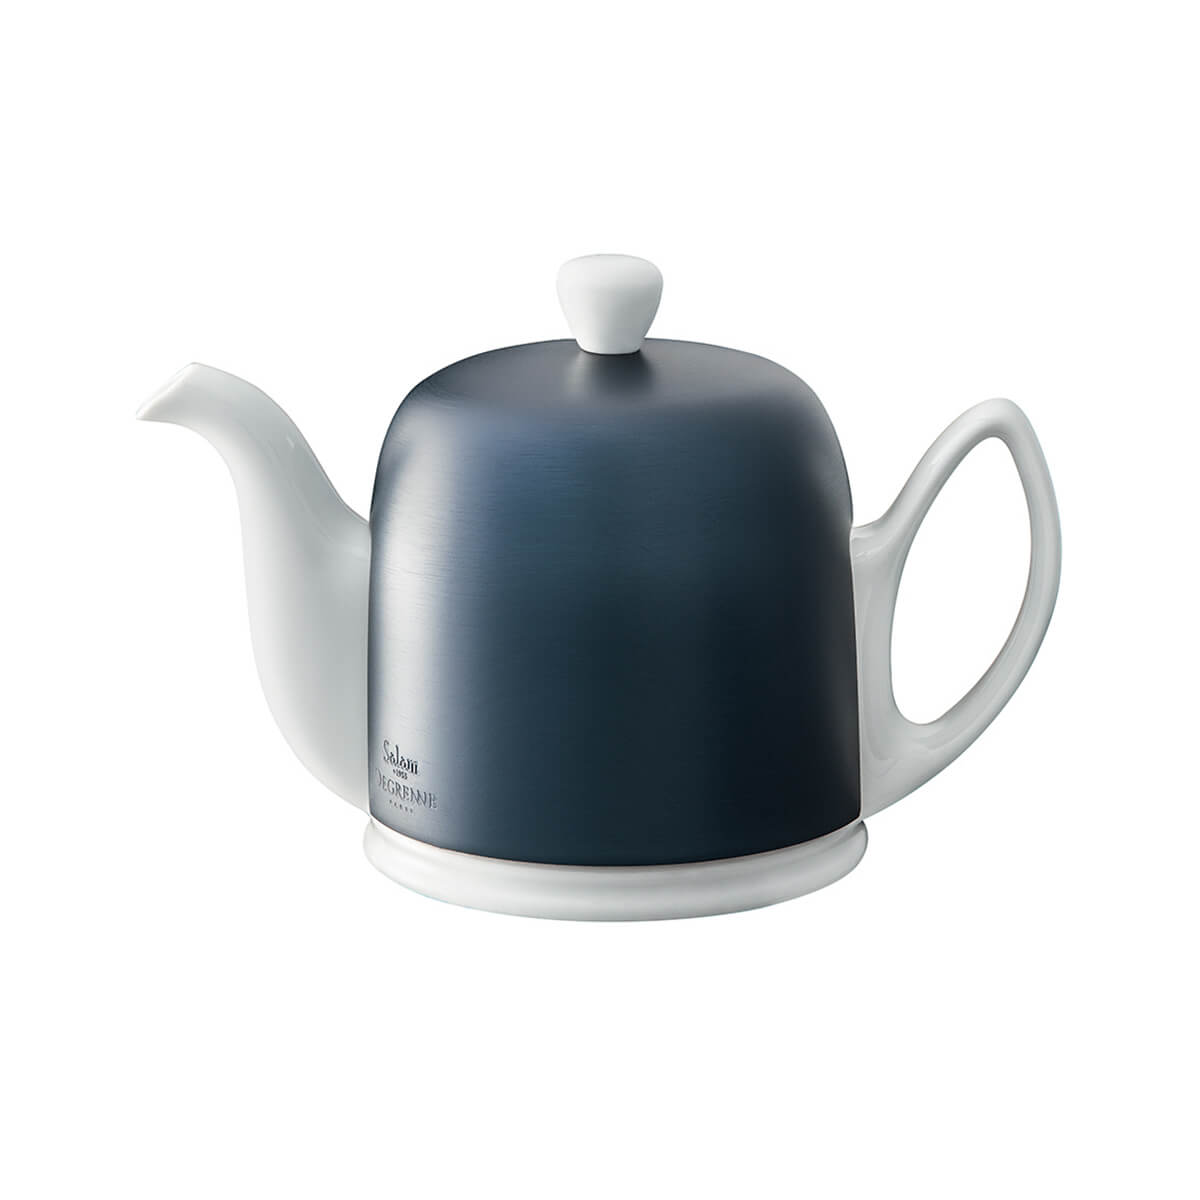 Guy Degrenne Salam Monochrome Blue 4 Cup Insulated Teapot, 24 Ounces – Wine  And Tableware